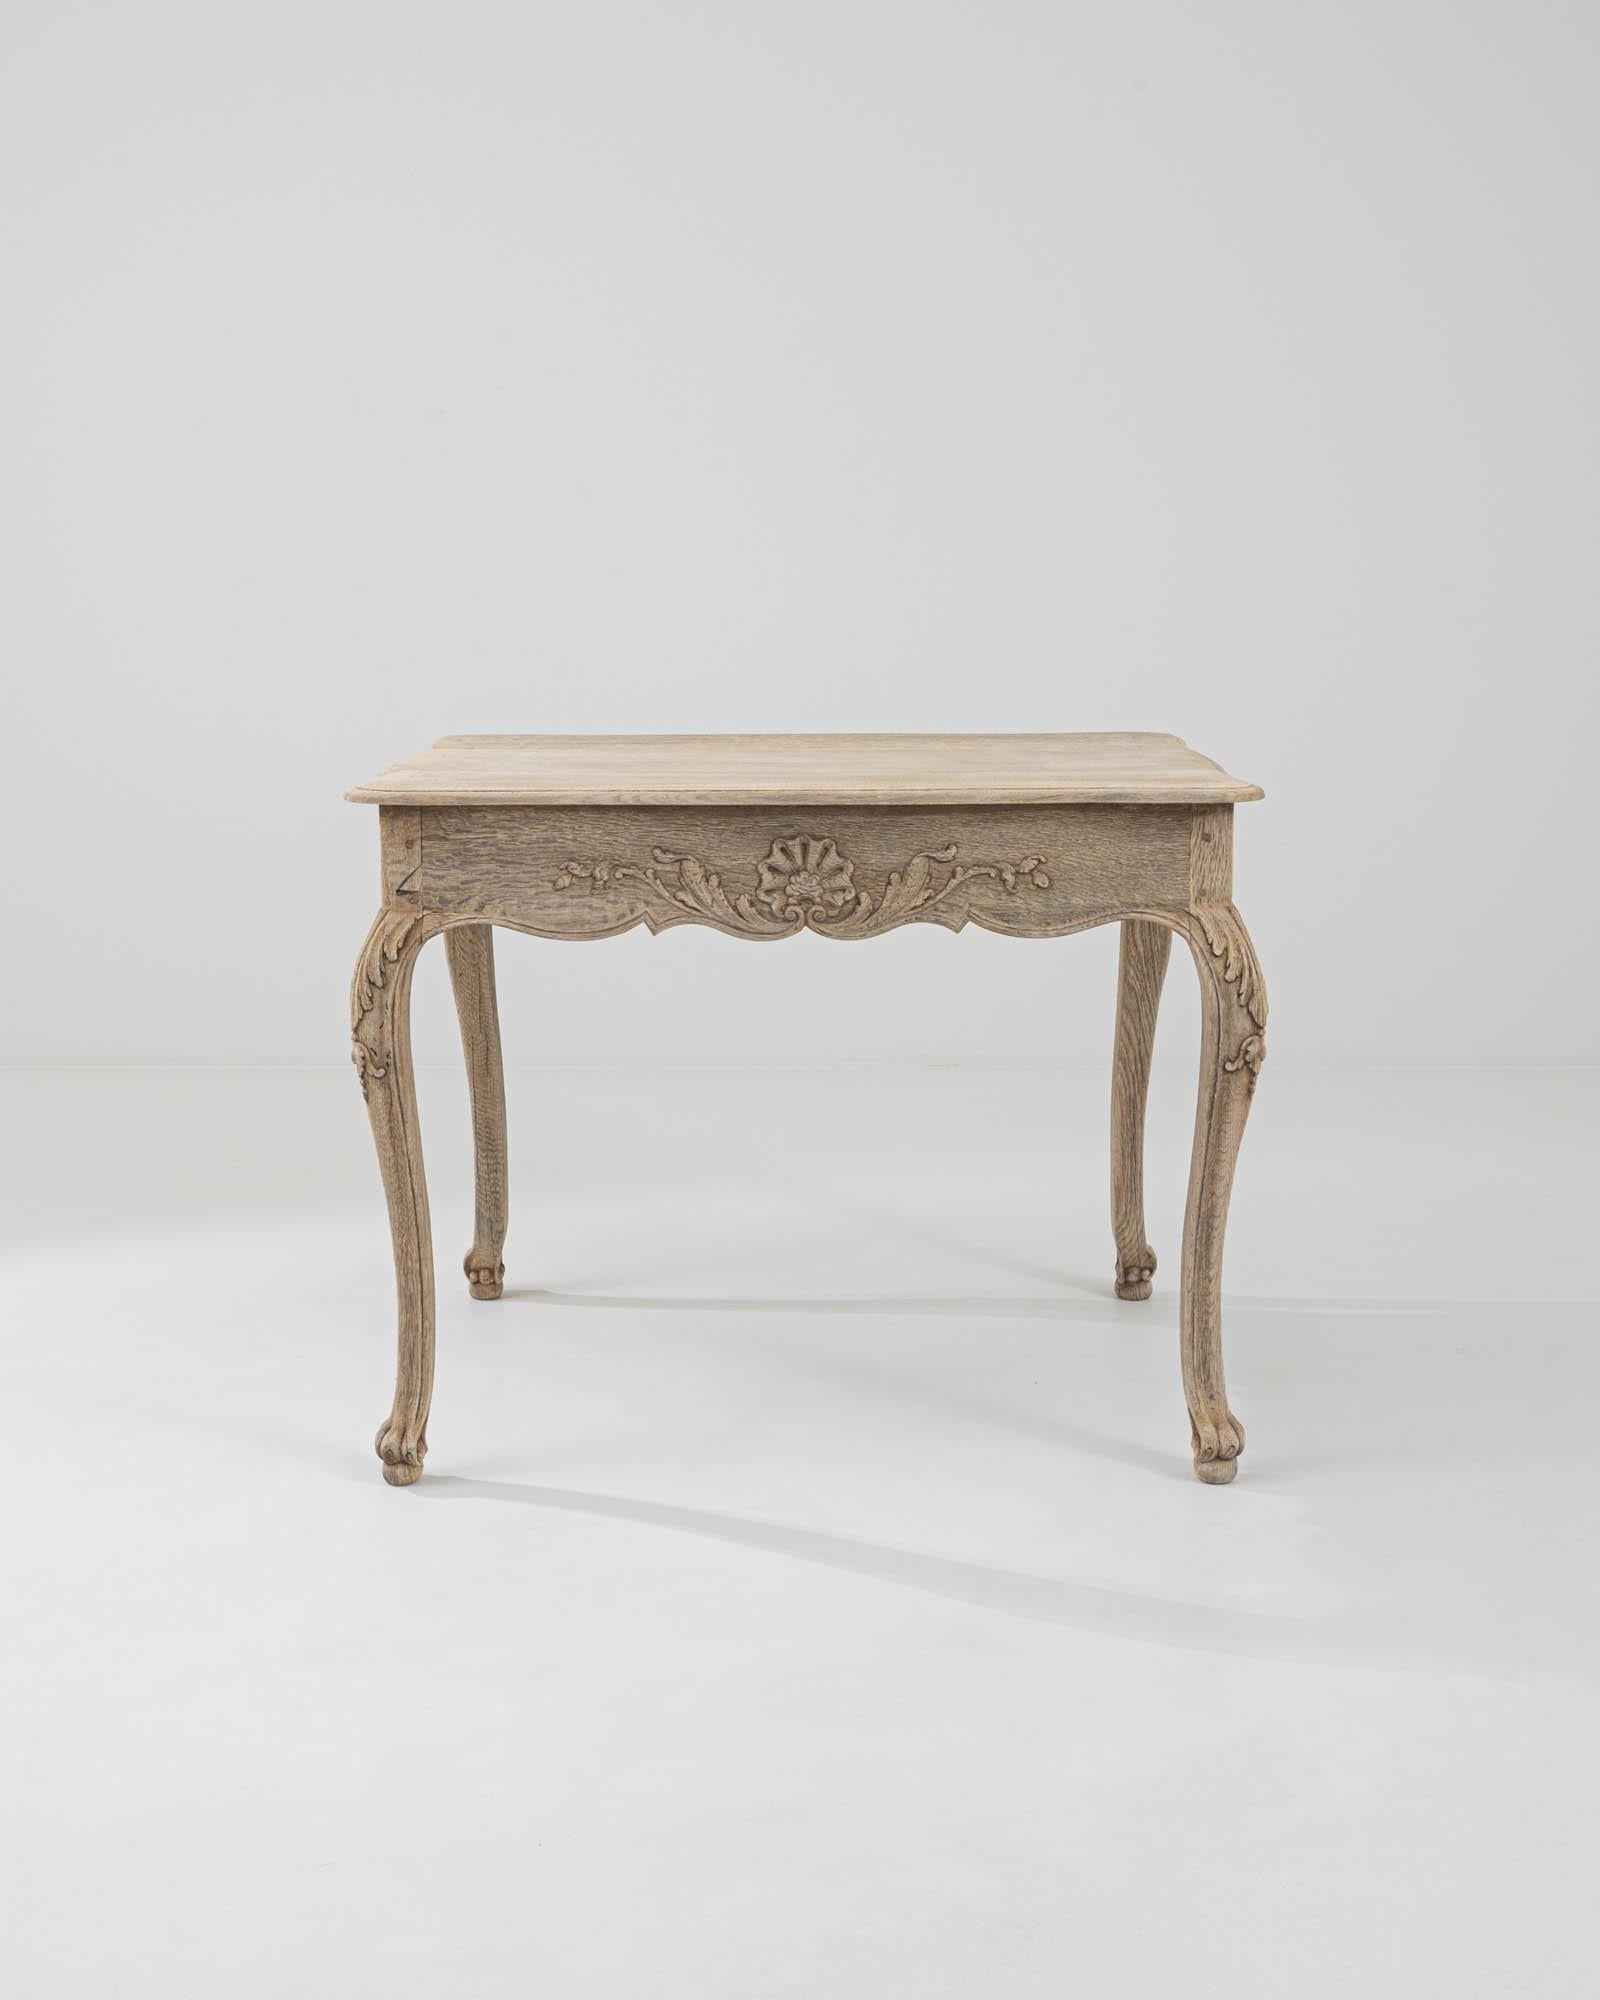 This oak side table was made in 19th-century France. A smooth tabletop with subtly carved edges rests atop an ornate base — the scalloped apron adorned with exquisite floral and foliate carvings, mirrored in the graceful curves of the cabriole legs,